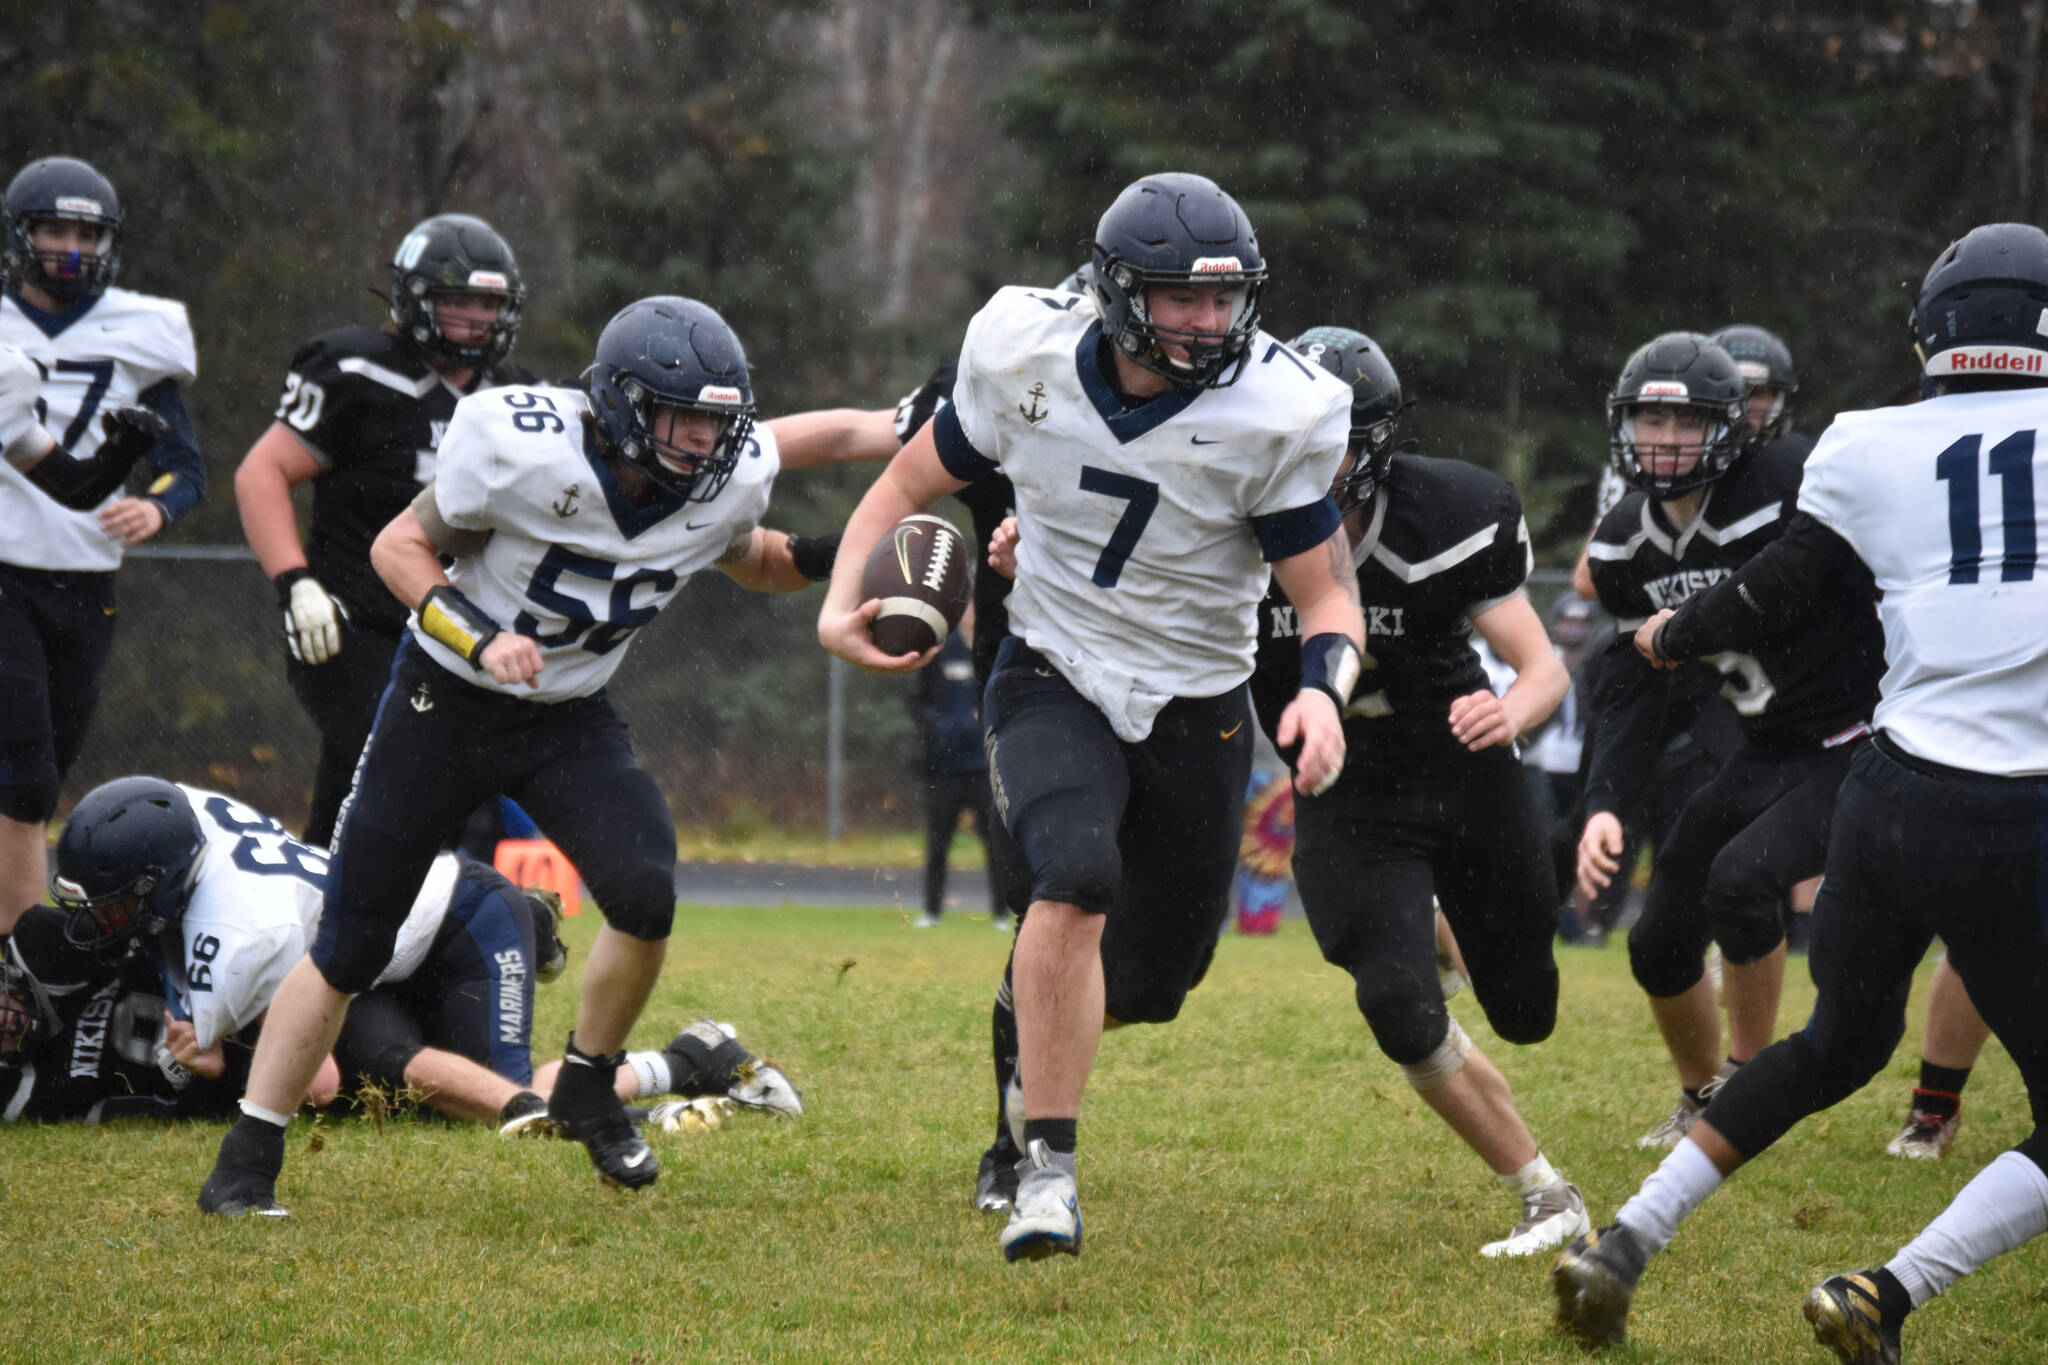 Homer’s Carter Tennison runs with the ball, pursued by several Bulldogs, during the playoff game on Saturday, Oct. 8, 2022, at Nikiski Middle/High School in Nikiski, Alaska. (Jake Dye/Peninsula Clarion)